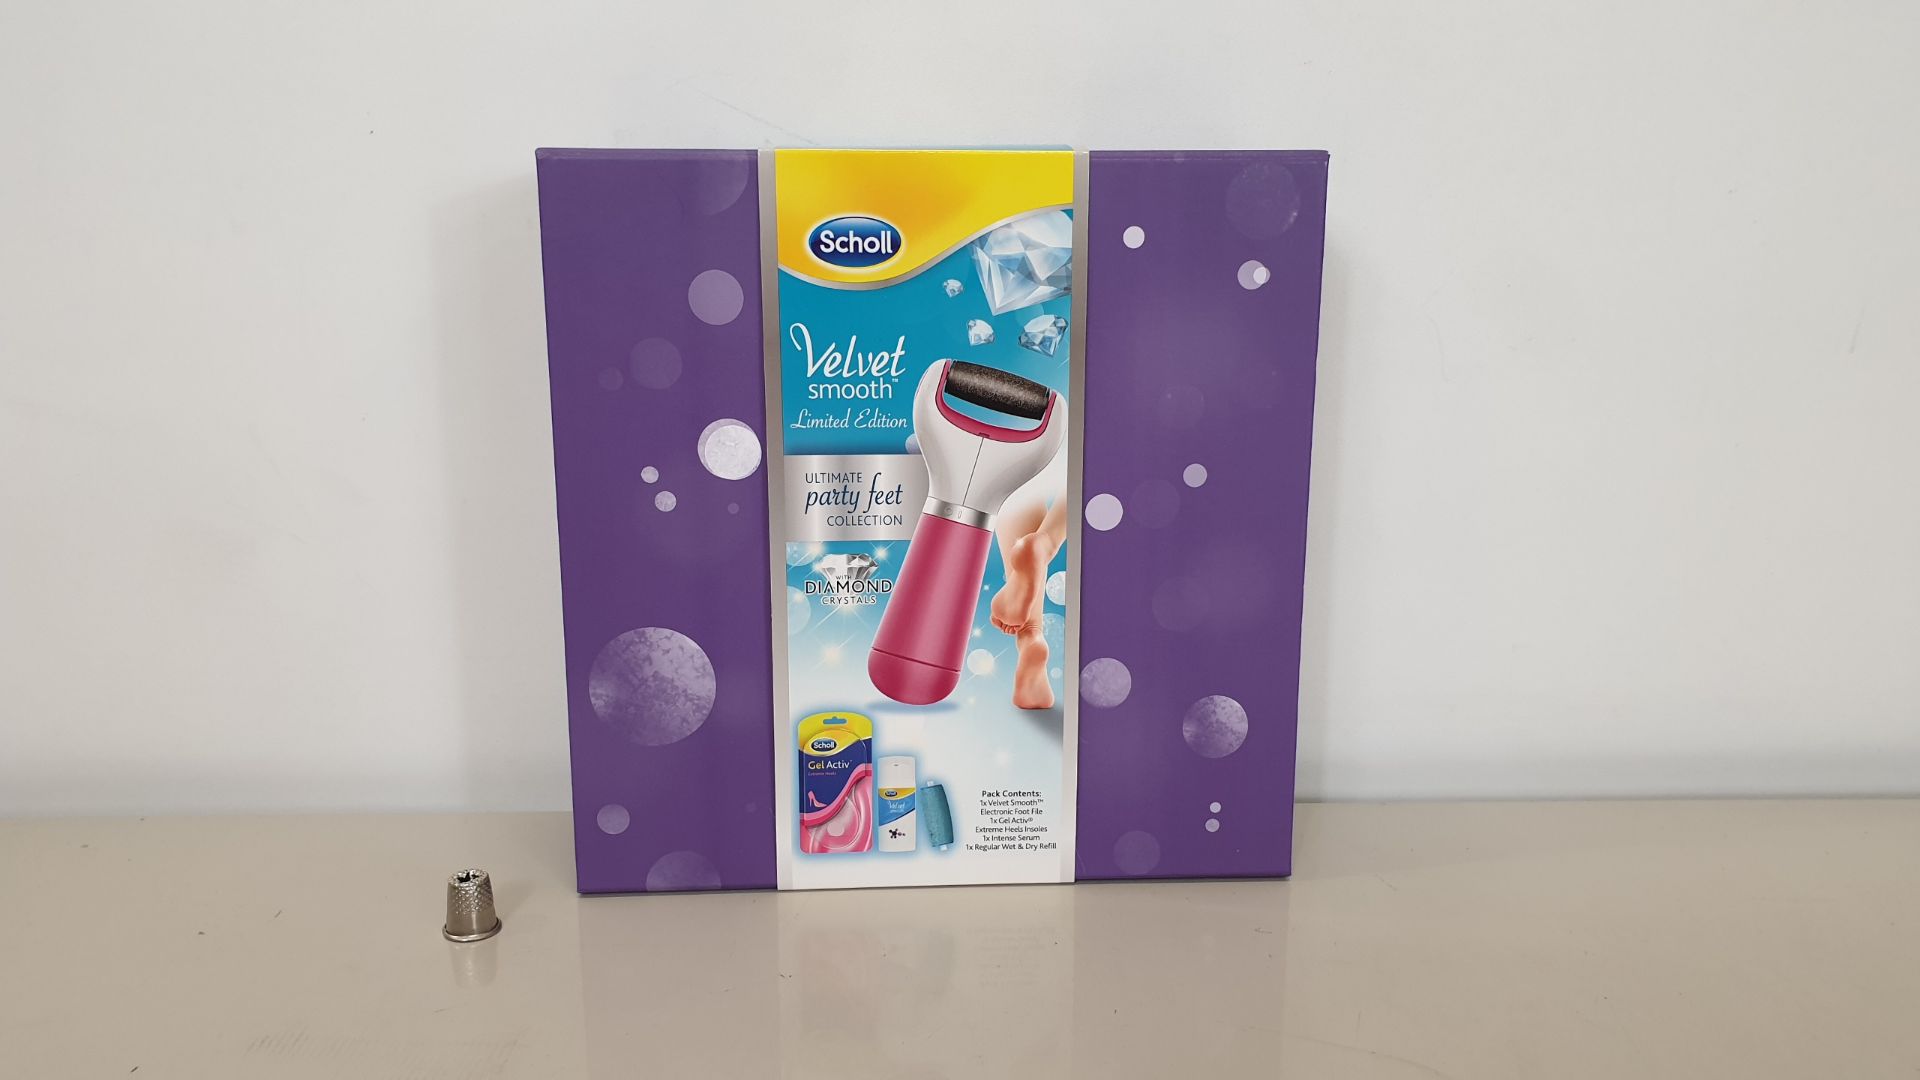 6 X BRAND NEW SCHOLL VELVET SMOOTH LIMITED EDITION ULTIMATE PARTY FEET COLLECTION - IN ONE BOX